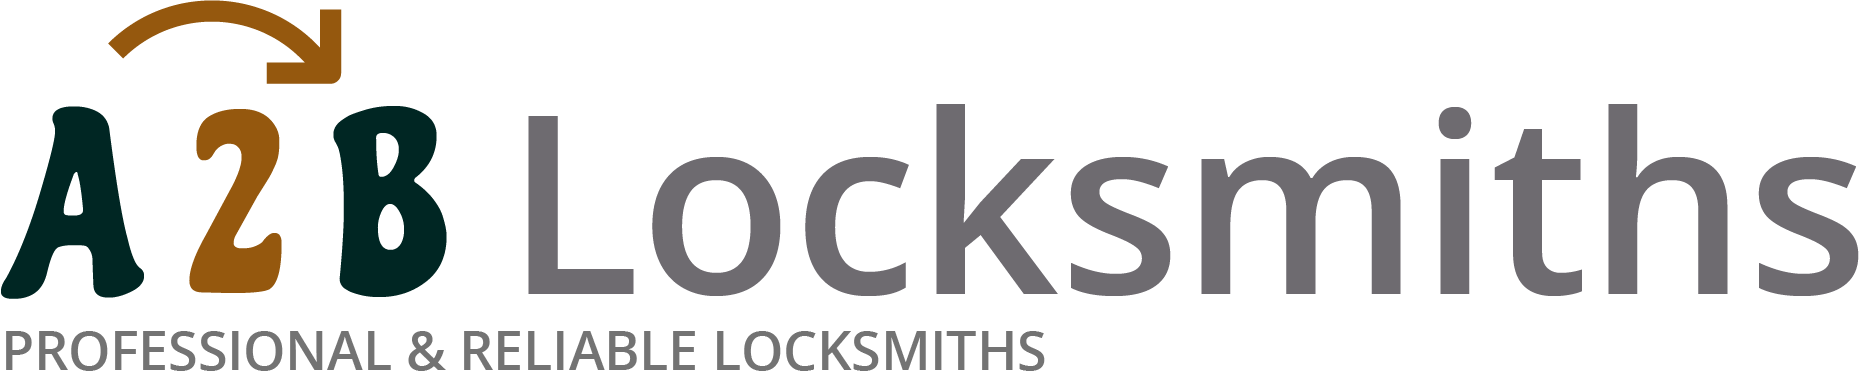 If you are locked out of house in Neston, our 24/7 local emergency locksmith services can help you.